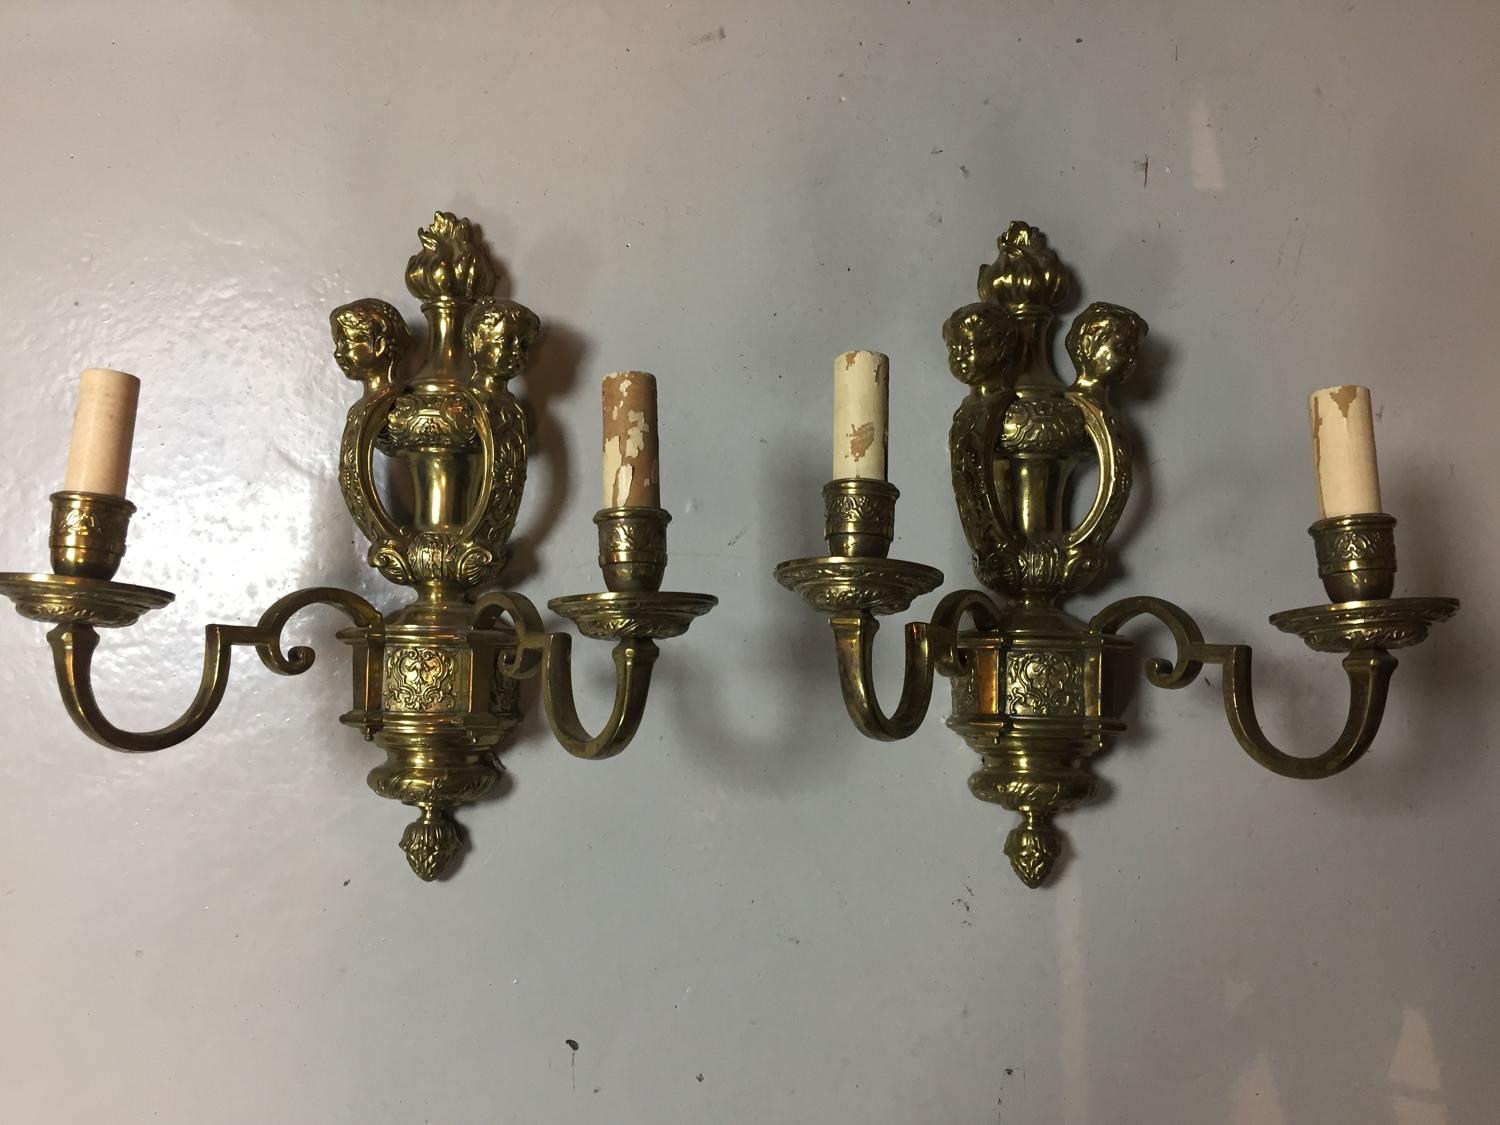 A pair of gilt-brass Knole style wall lights